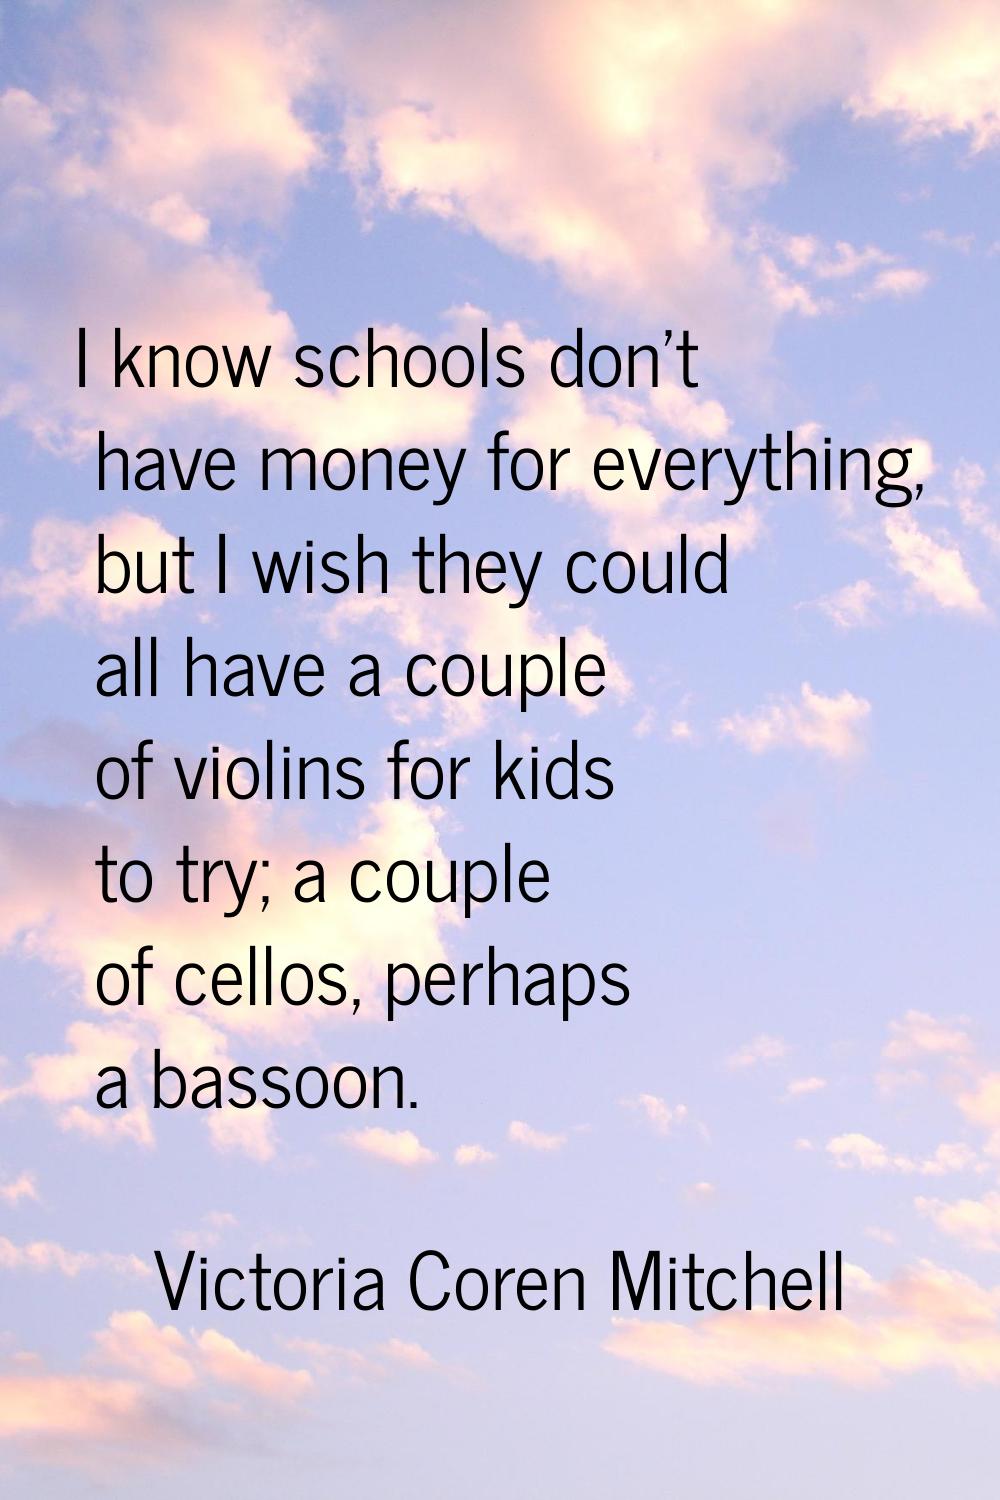 I know schools don't have money for everything, but I wish they could all have a couple of violins 